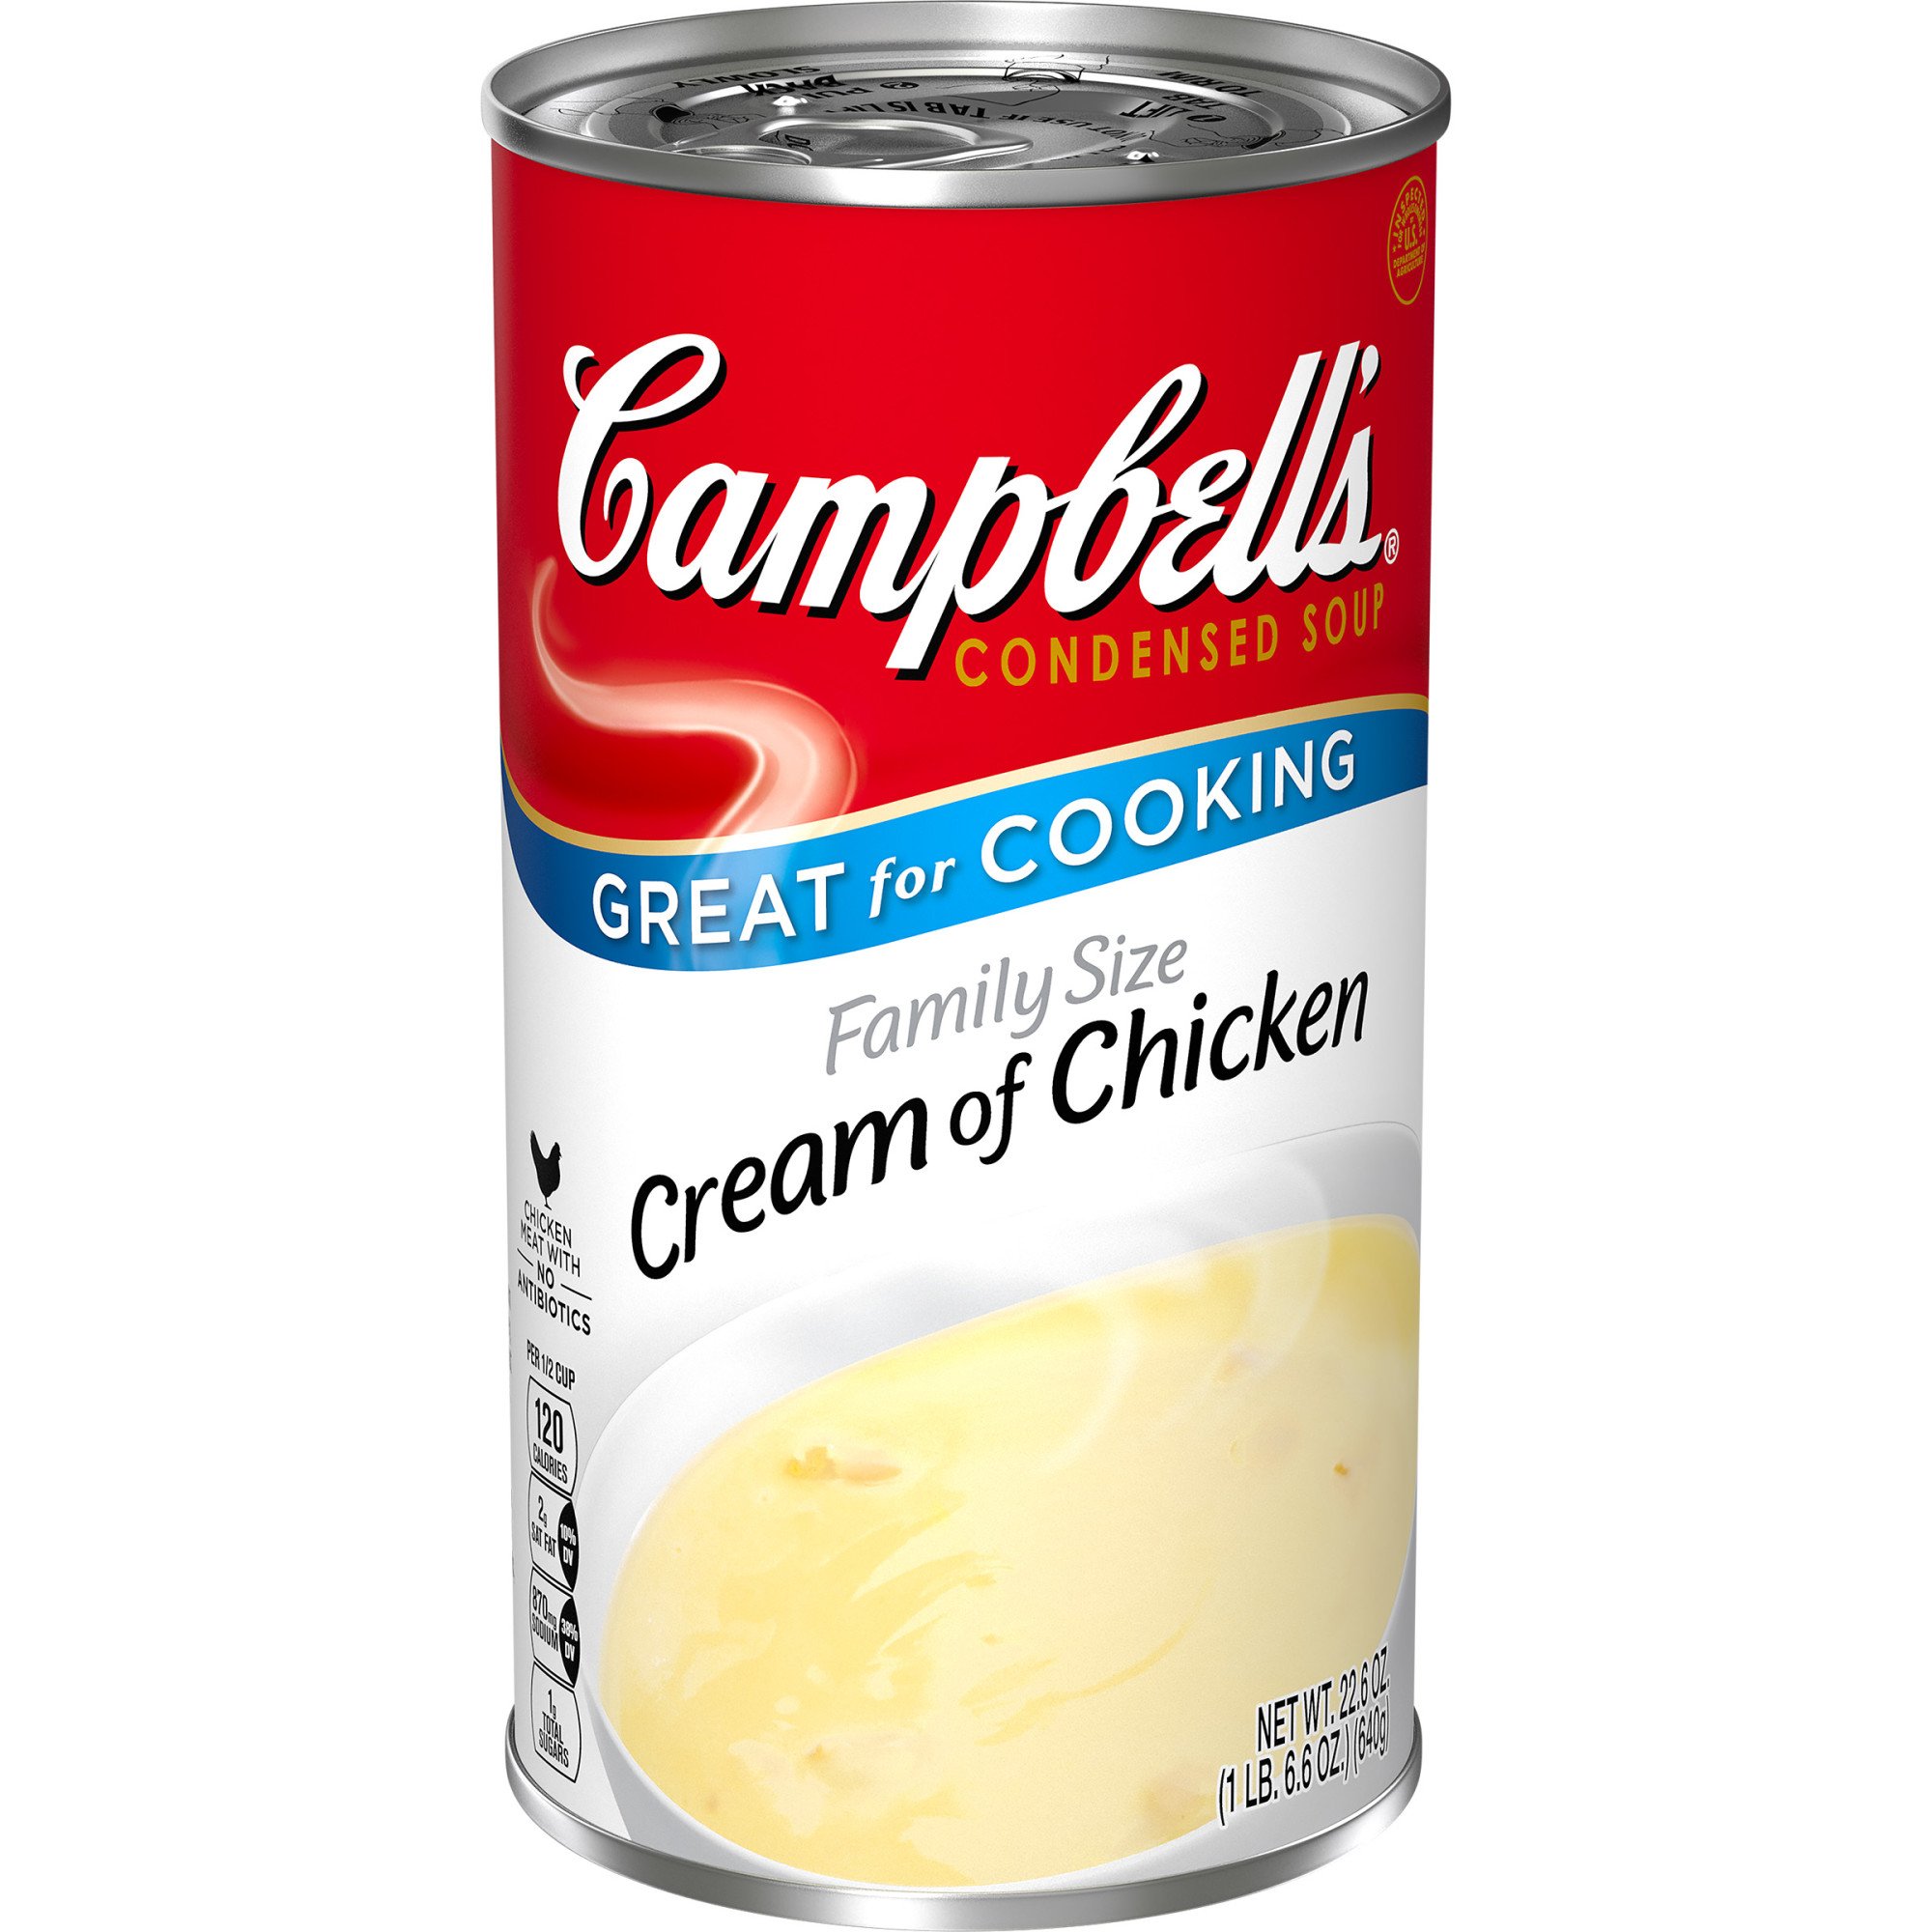 Campbells Condensed Cream of Chicken Soup, Family Size, 22.6 Ounce Can ...